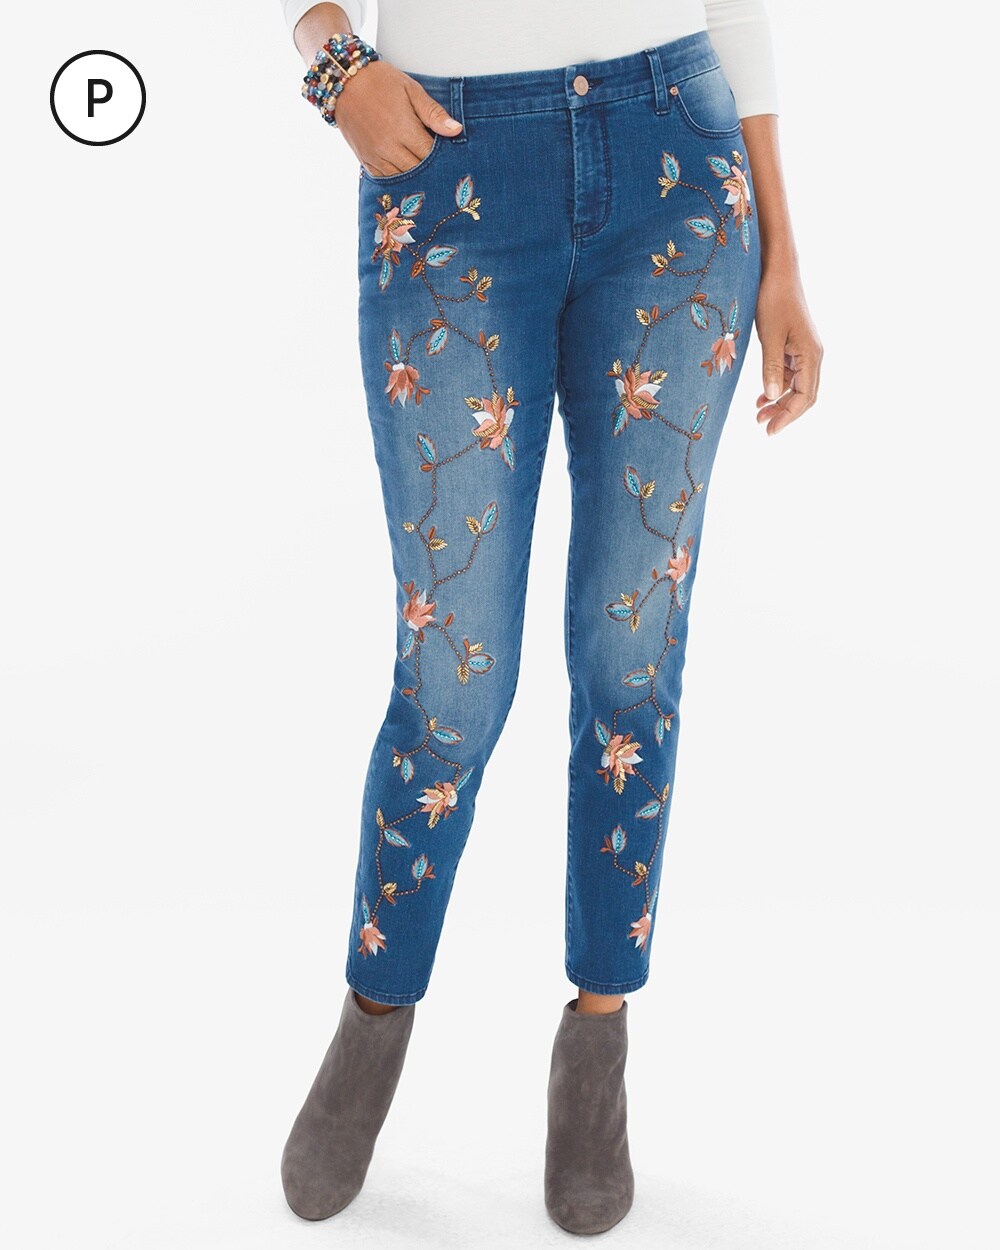 So Slimming Petite Floral Embellished Girlfriend Ankle Jeans